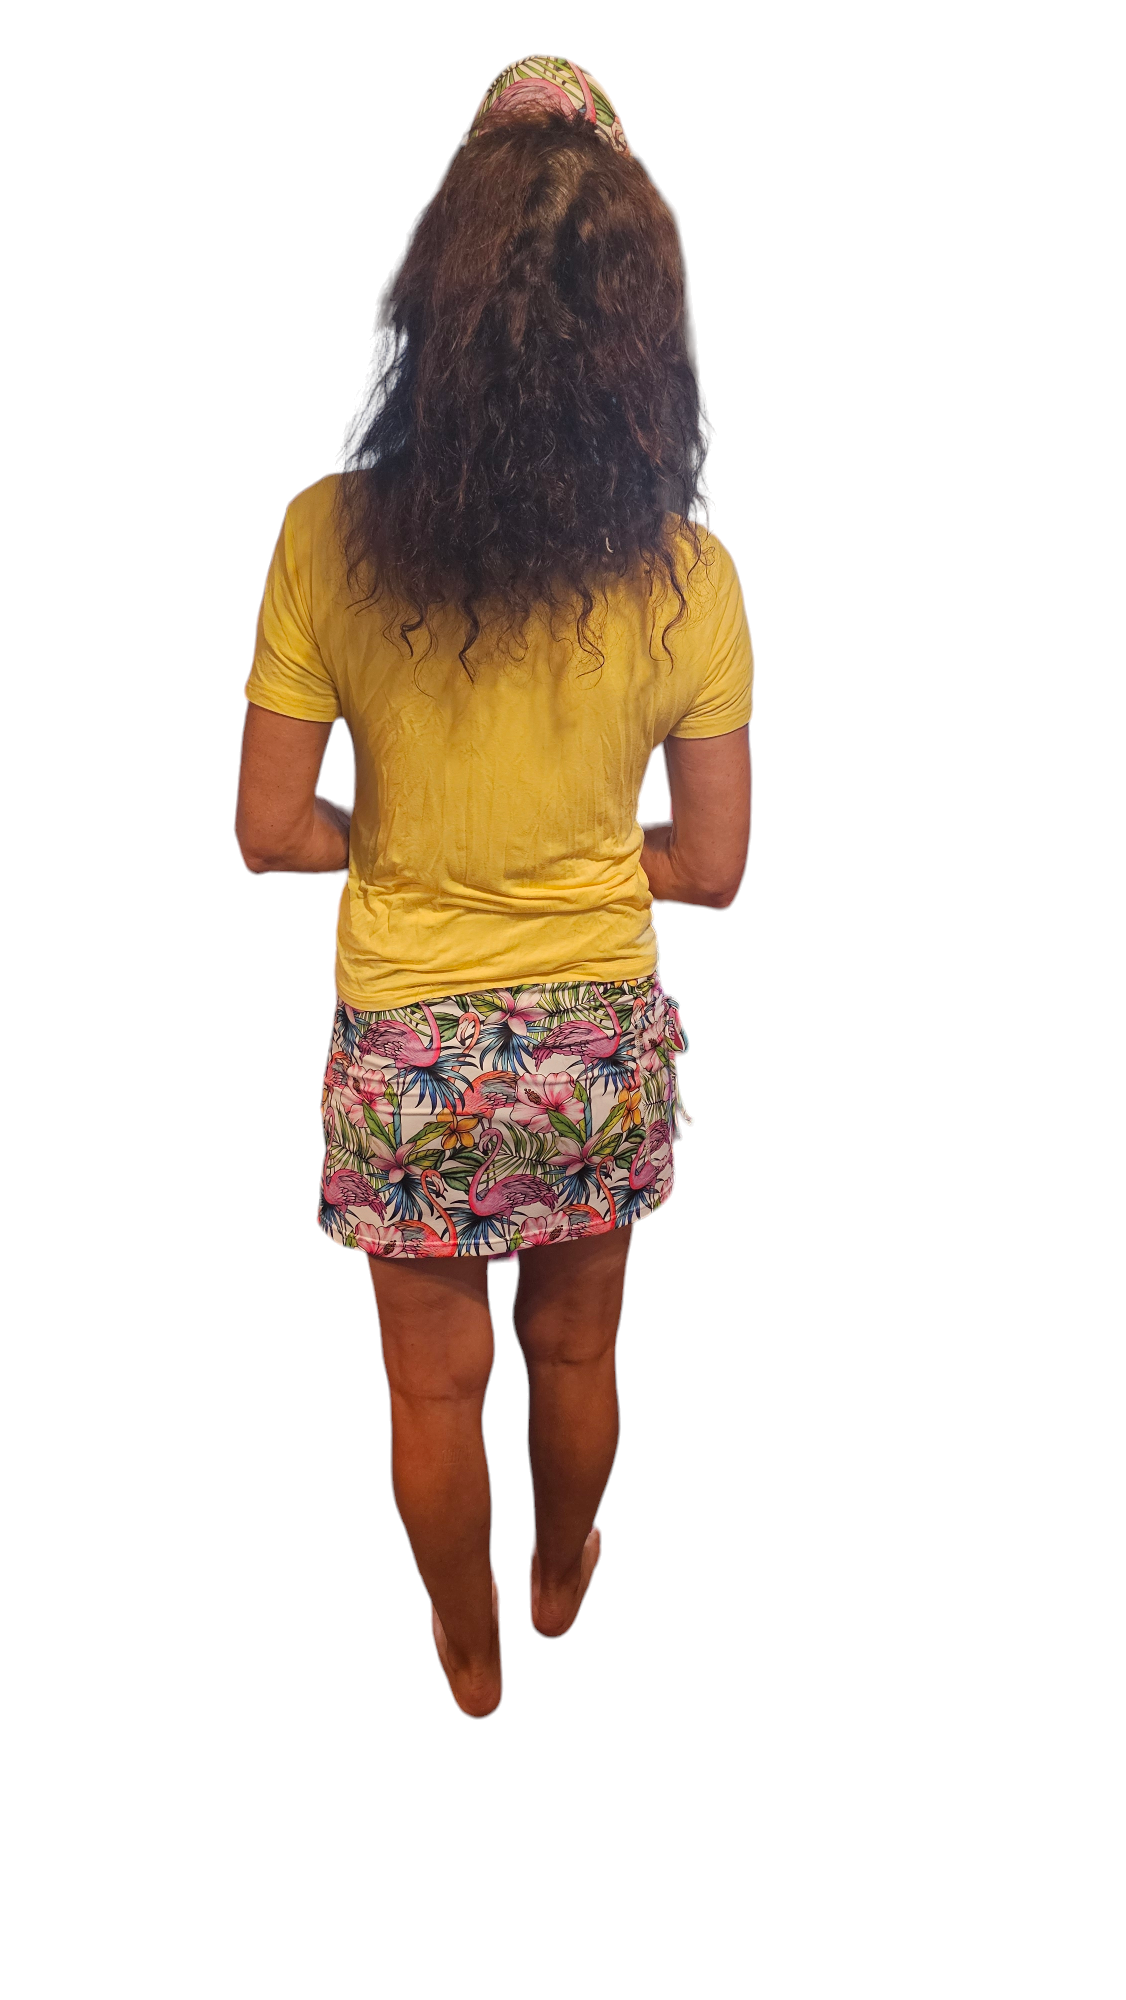 a woman in a yellow shirt and colorful skirt